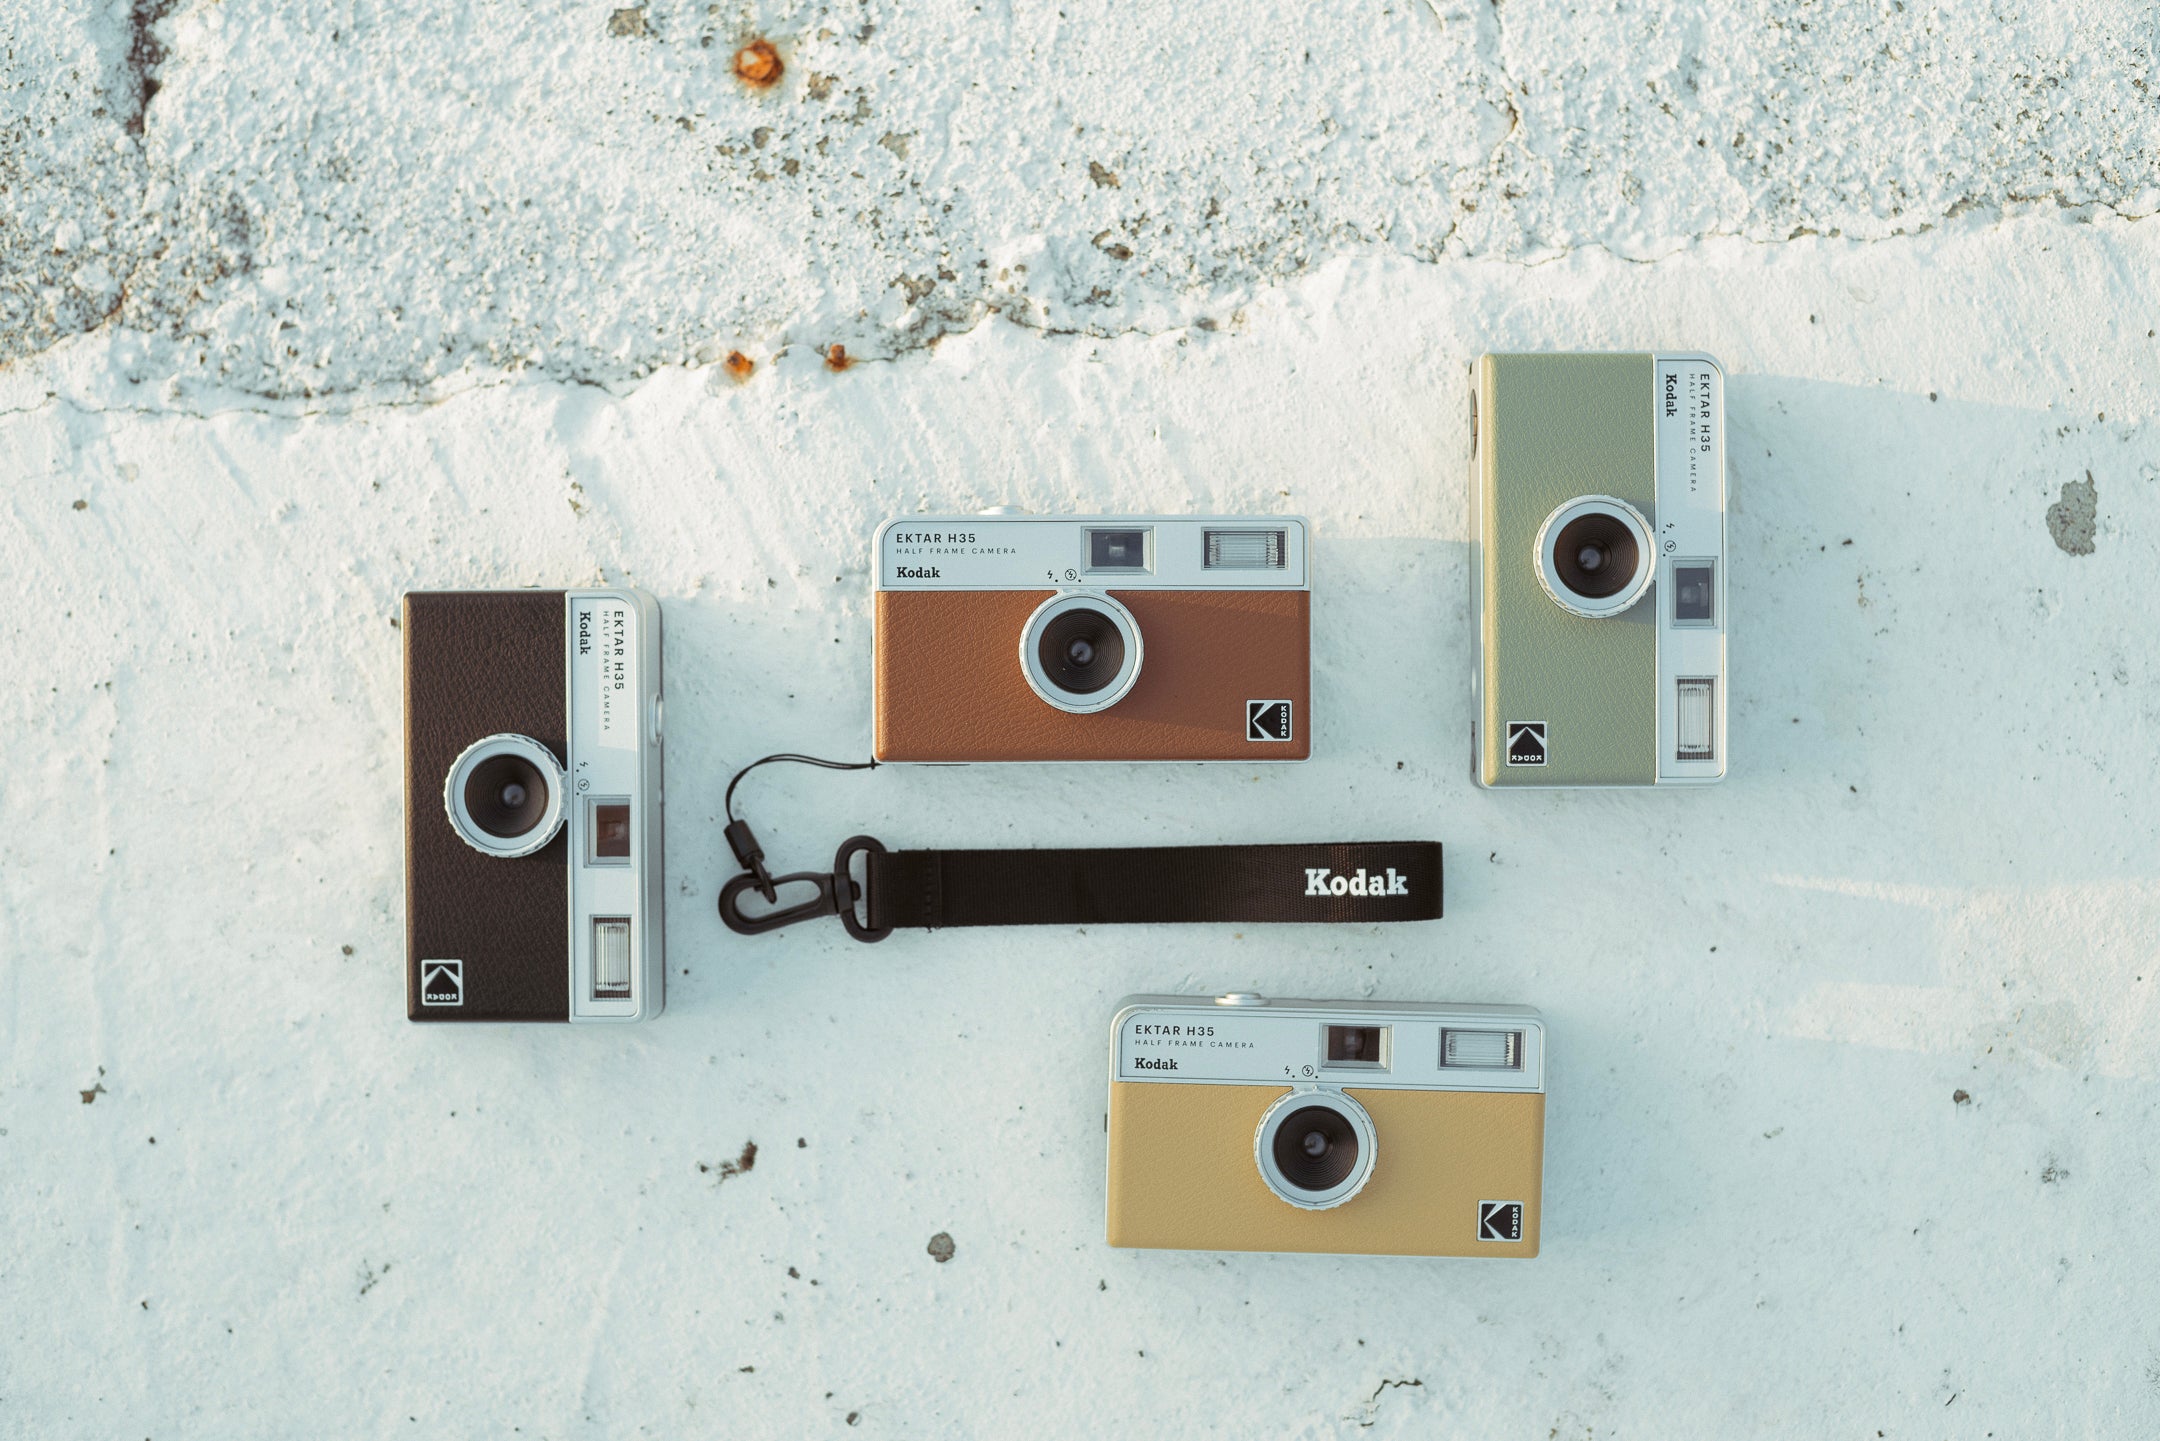  KODAK EKTAR H35 Half Frame Film Camera, 35mm, Reusable,  Focus-Free, Lightweight, Easy-to-Use (Sand) (Film & AAA Battery are not  Included) : Electronics